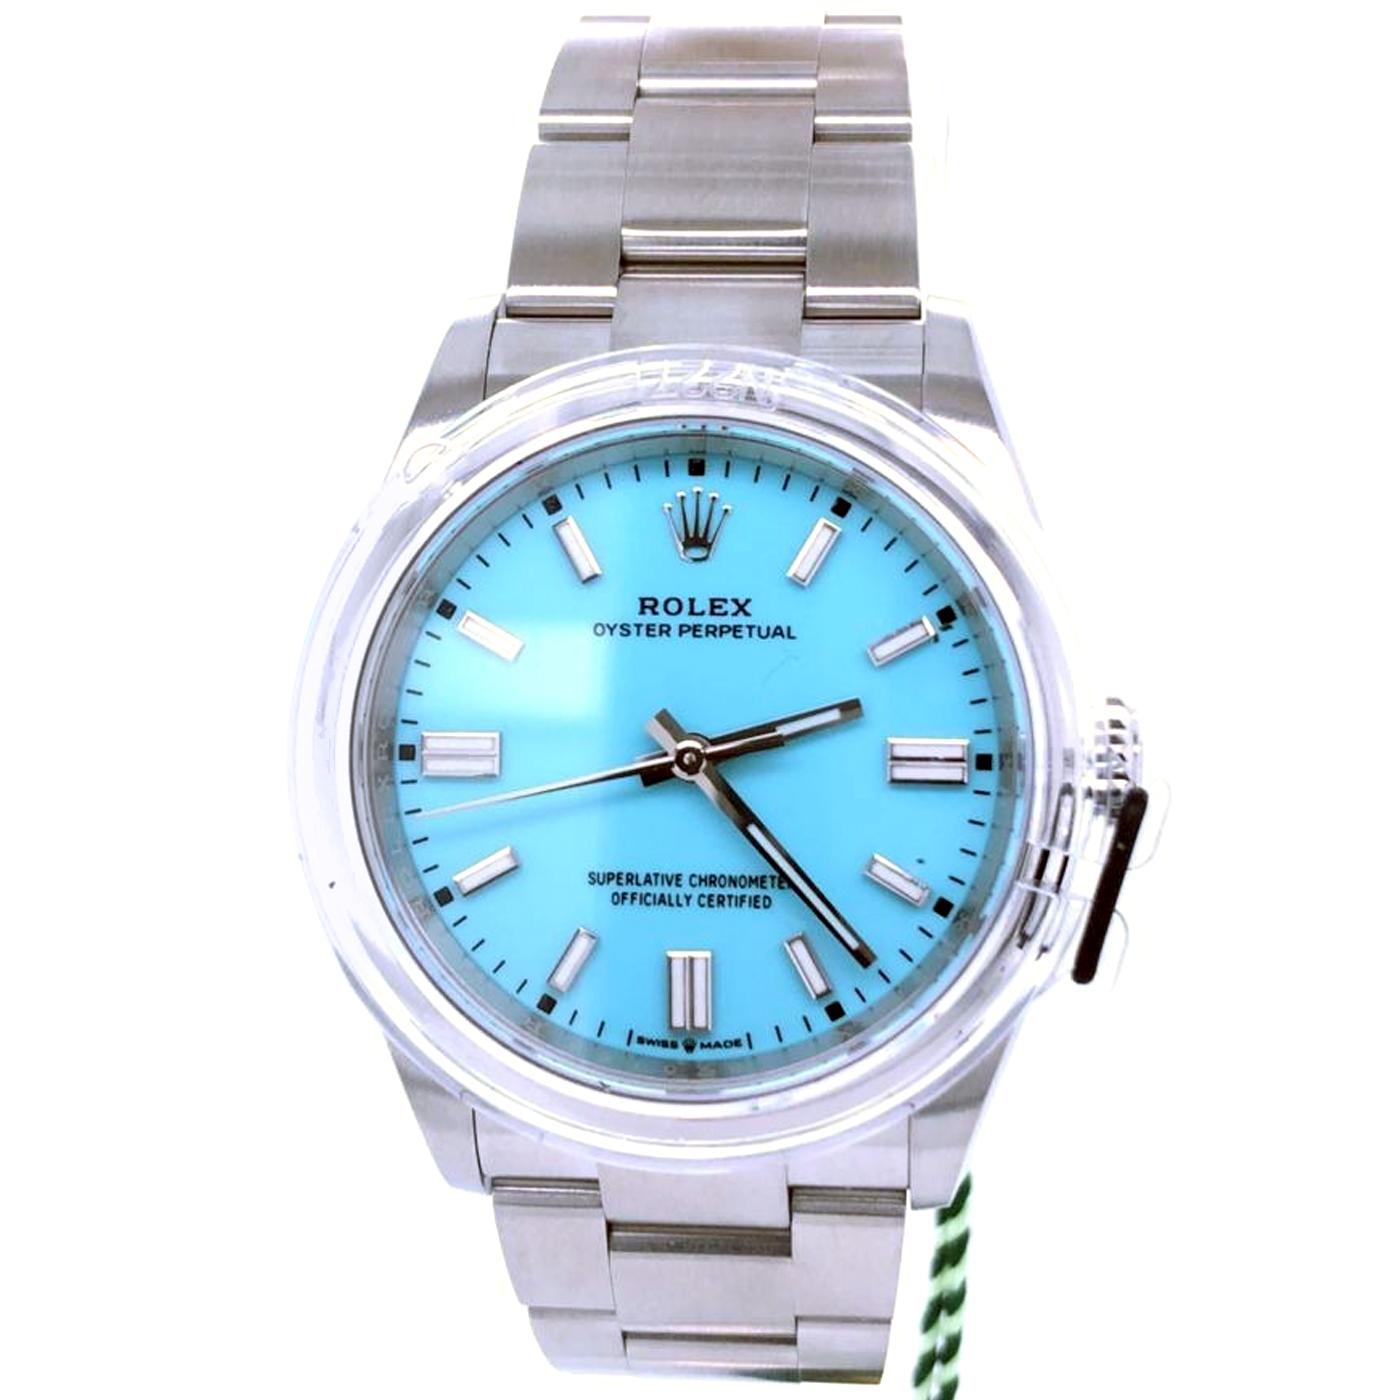 The Oyster Perpetual 36 with a turquoise blue dial and an Oyster bracelet. The aesthetics of the Oyster Perpetual models set them apart as symbols of universal and classic style. They embody timeless form and function, firmly rooted in the